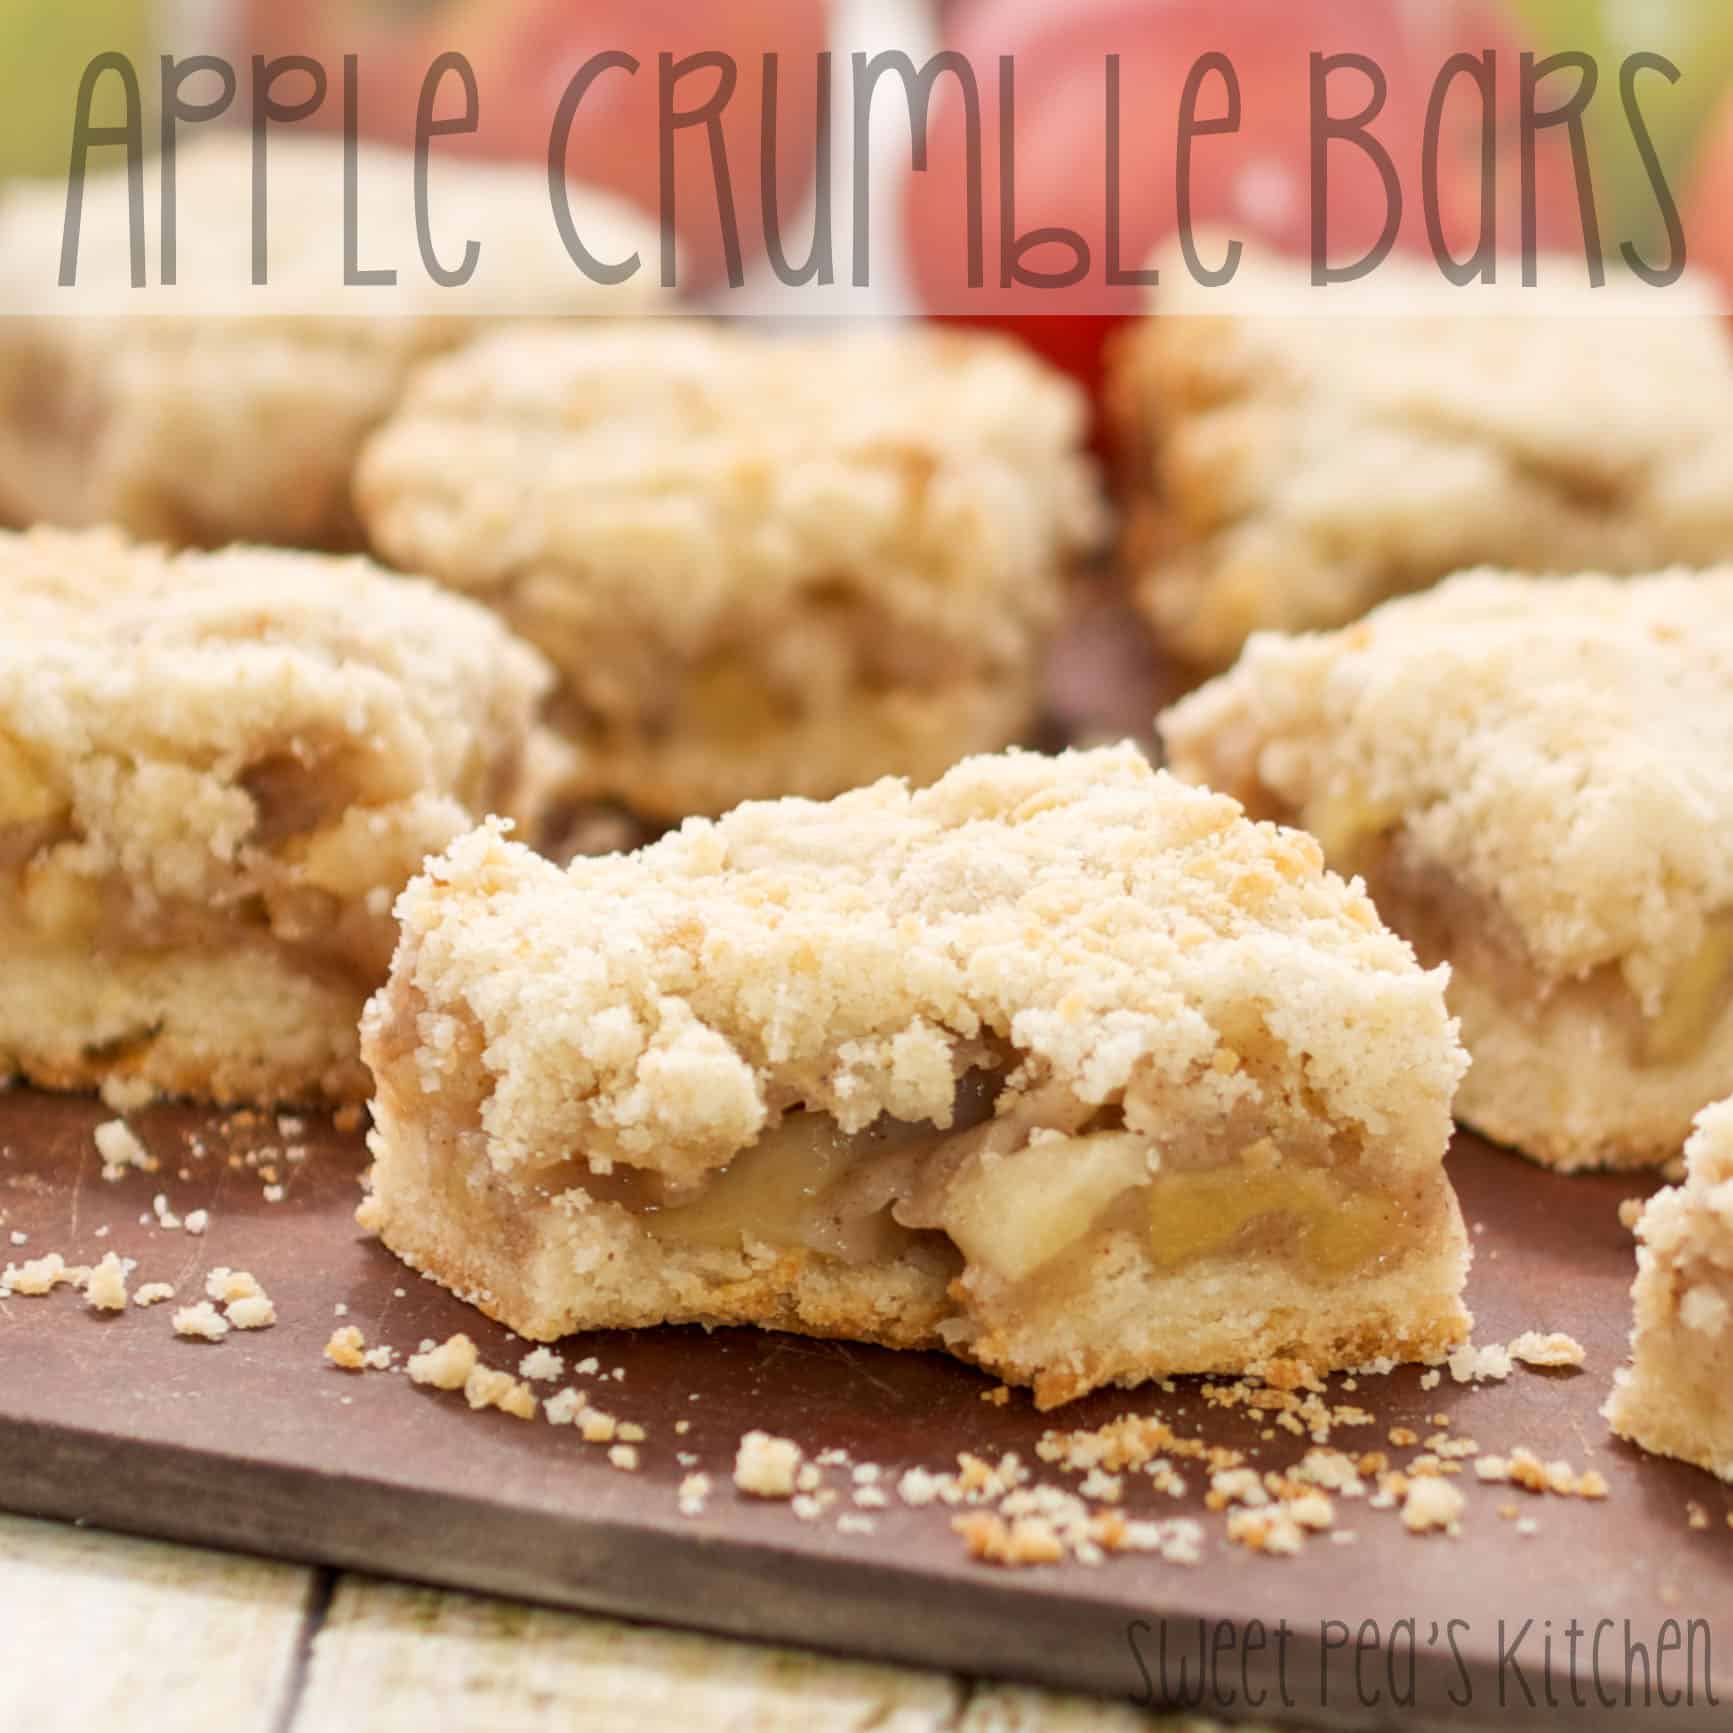 Apple crumble bars on a wooden board with one bite out of the one in front